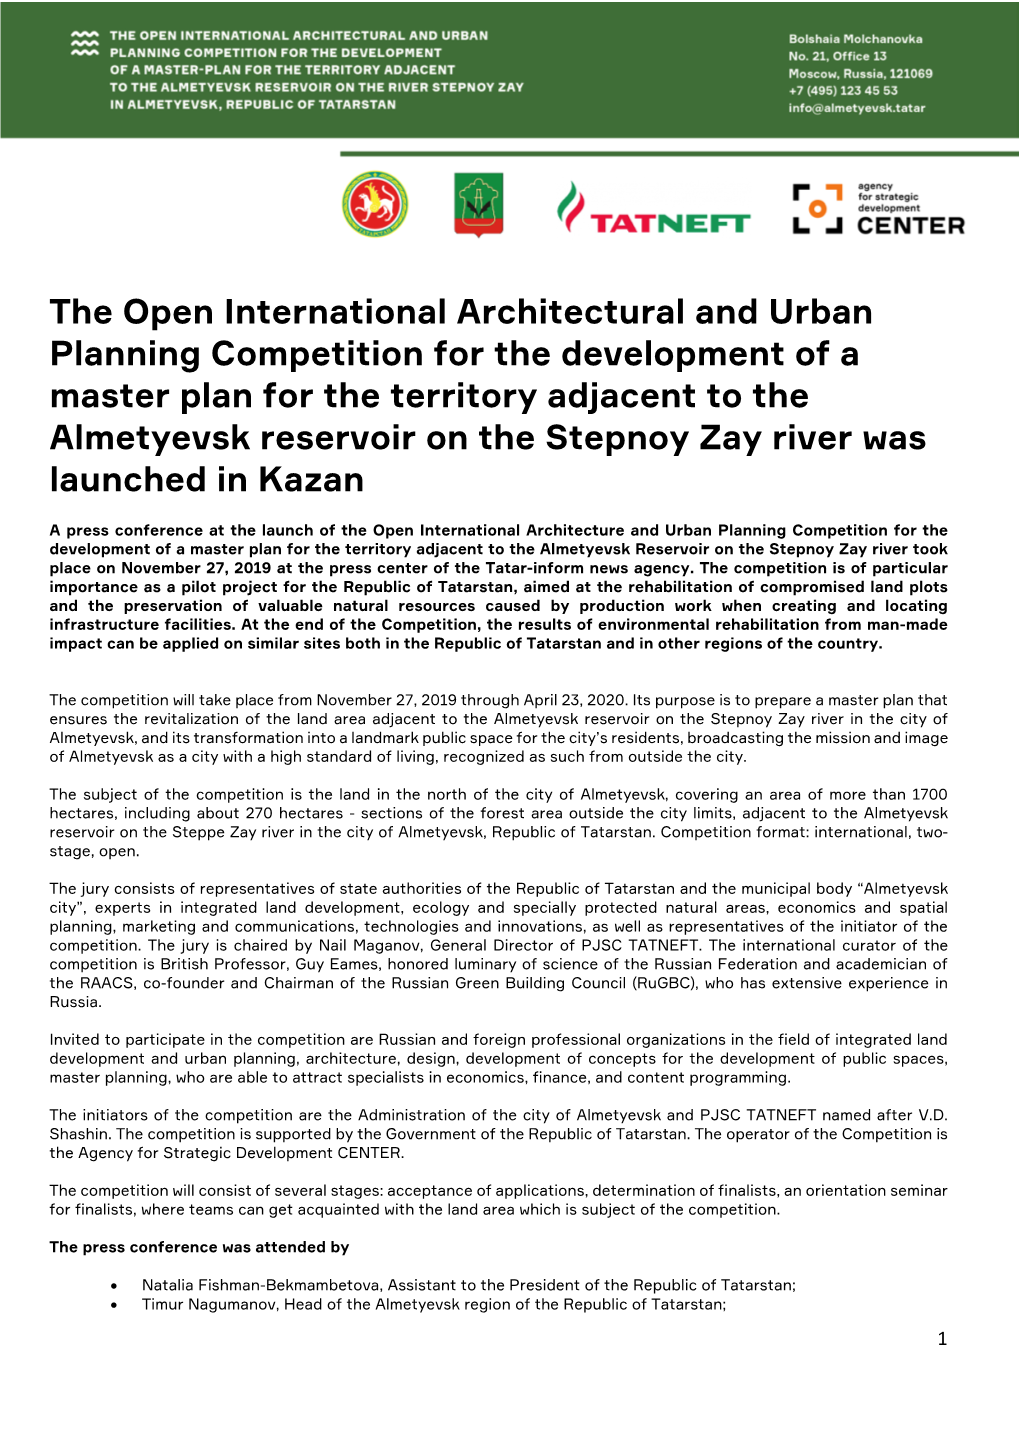 The Open International Architectural and Urban Planning Competition